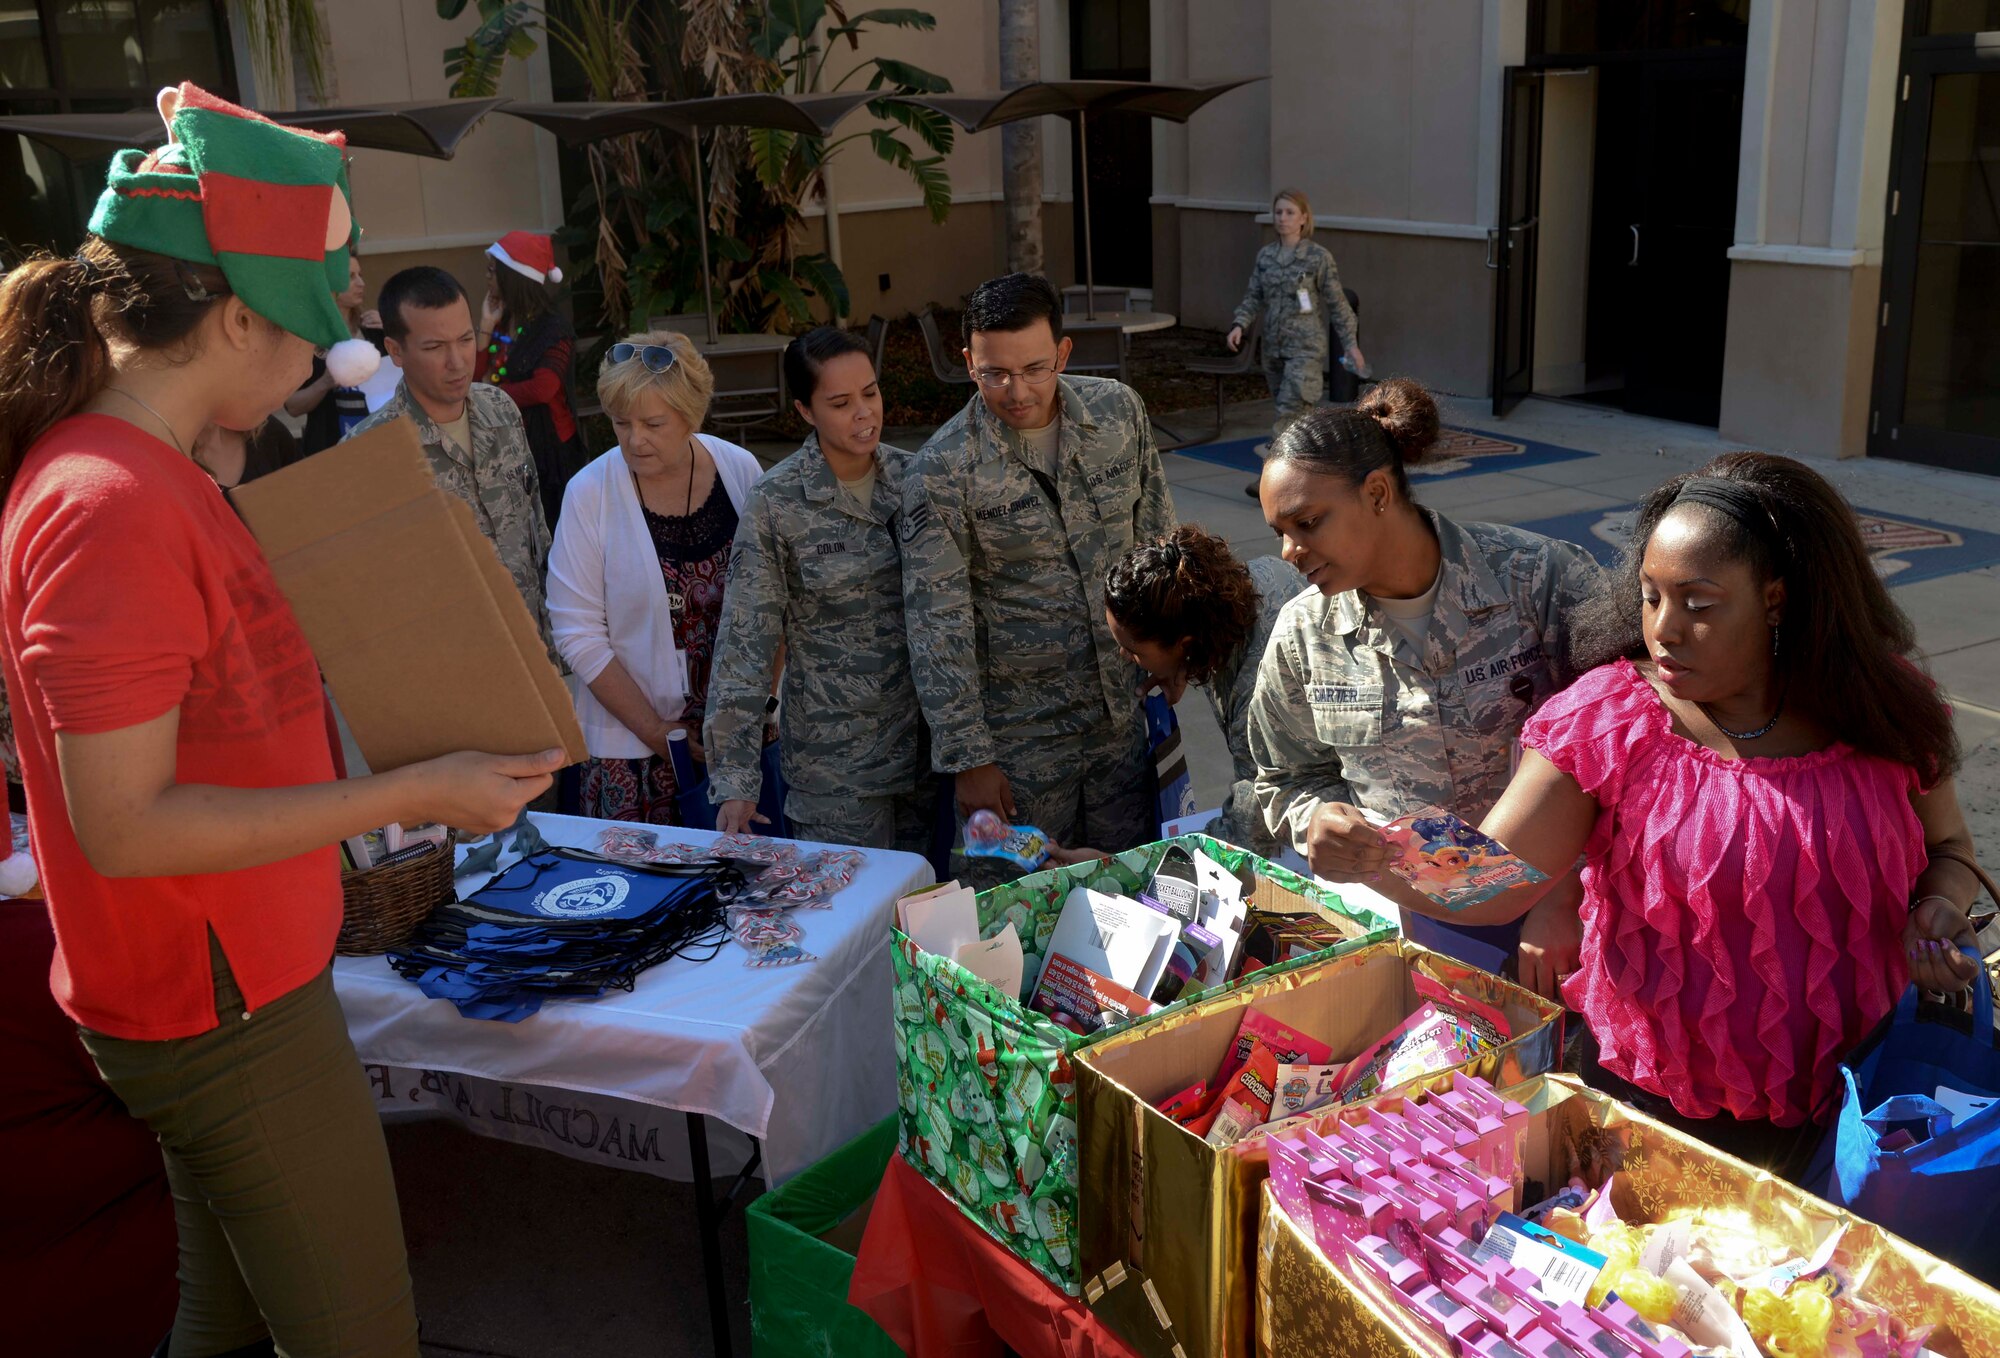 Personnel assigned to the 6th Medical Group (MDG) select free toys during the 6th MDG appreciation event at MacDill Air Force Base, Fla., Dec. 14, 2016. Medical personnel also received free refreshments and “thank you” cards, as well as a musical performance from the Air Force Band of the West Clarinet Quartet. (U.S. Air Force photo by Senior Airman Vernon L. Fowler Jr.)